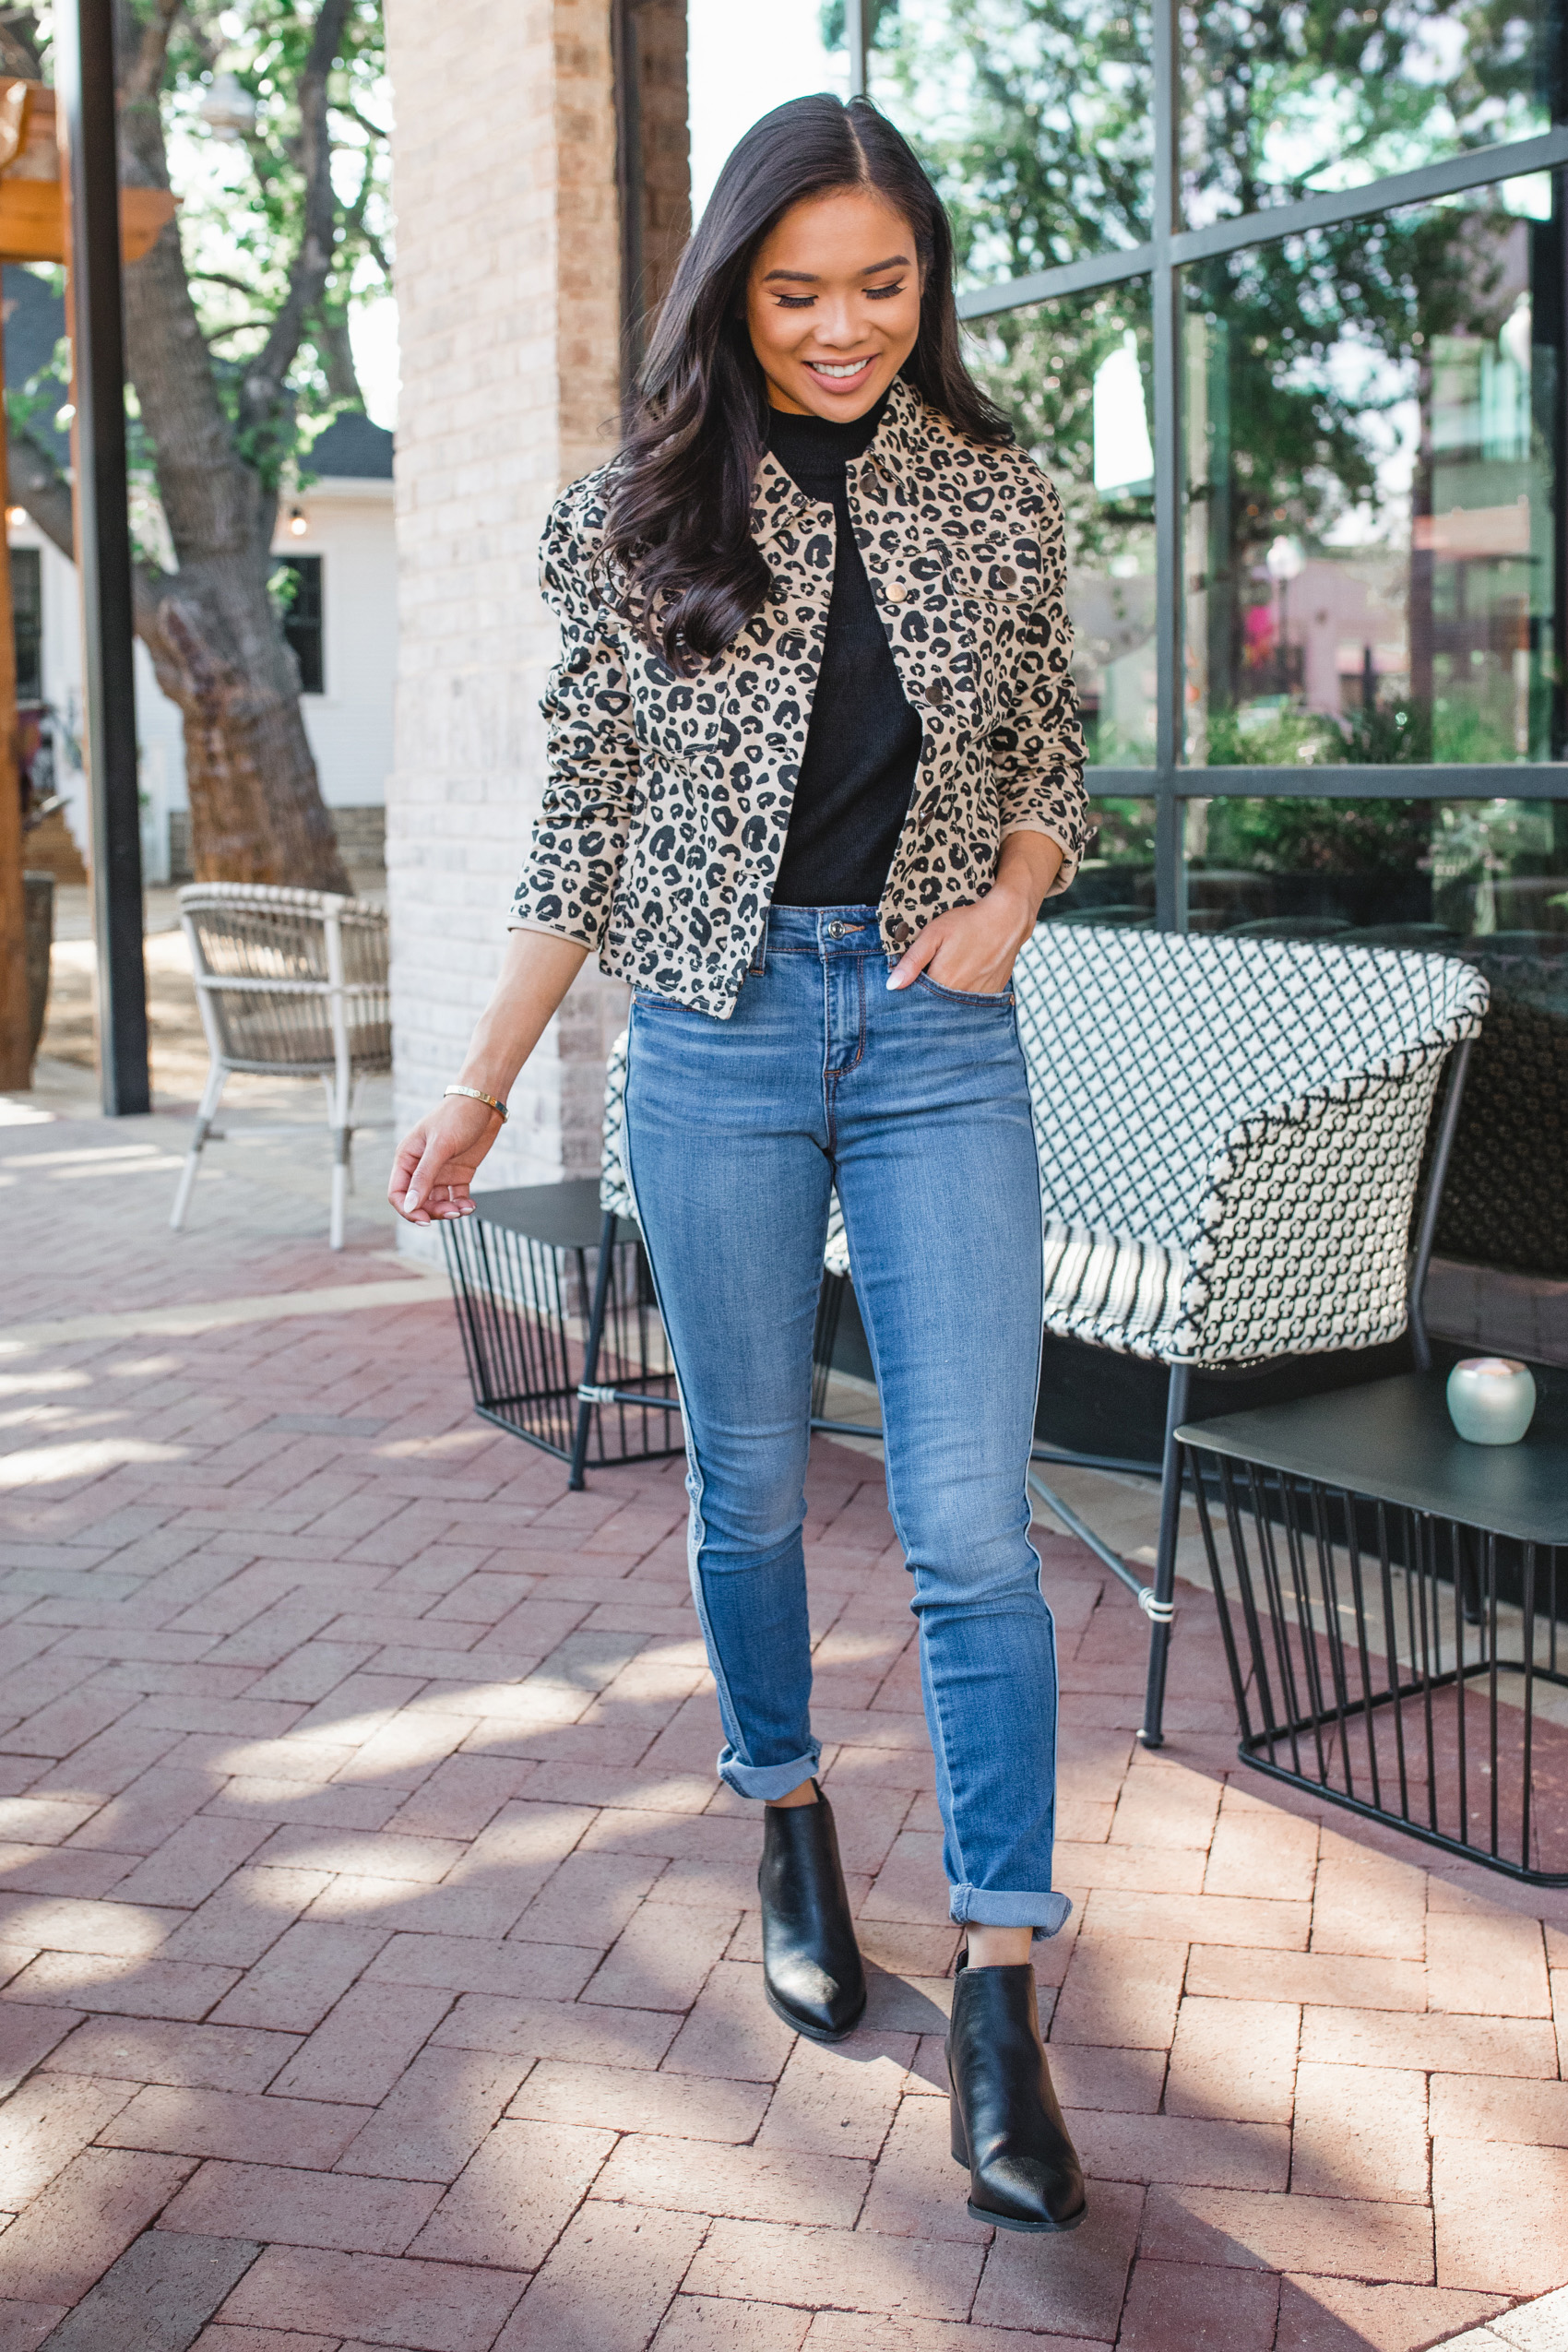 Leopard jacket for fall outfit idea with Walmart in Bishop Arts area of Dallas